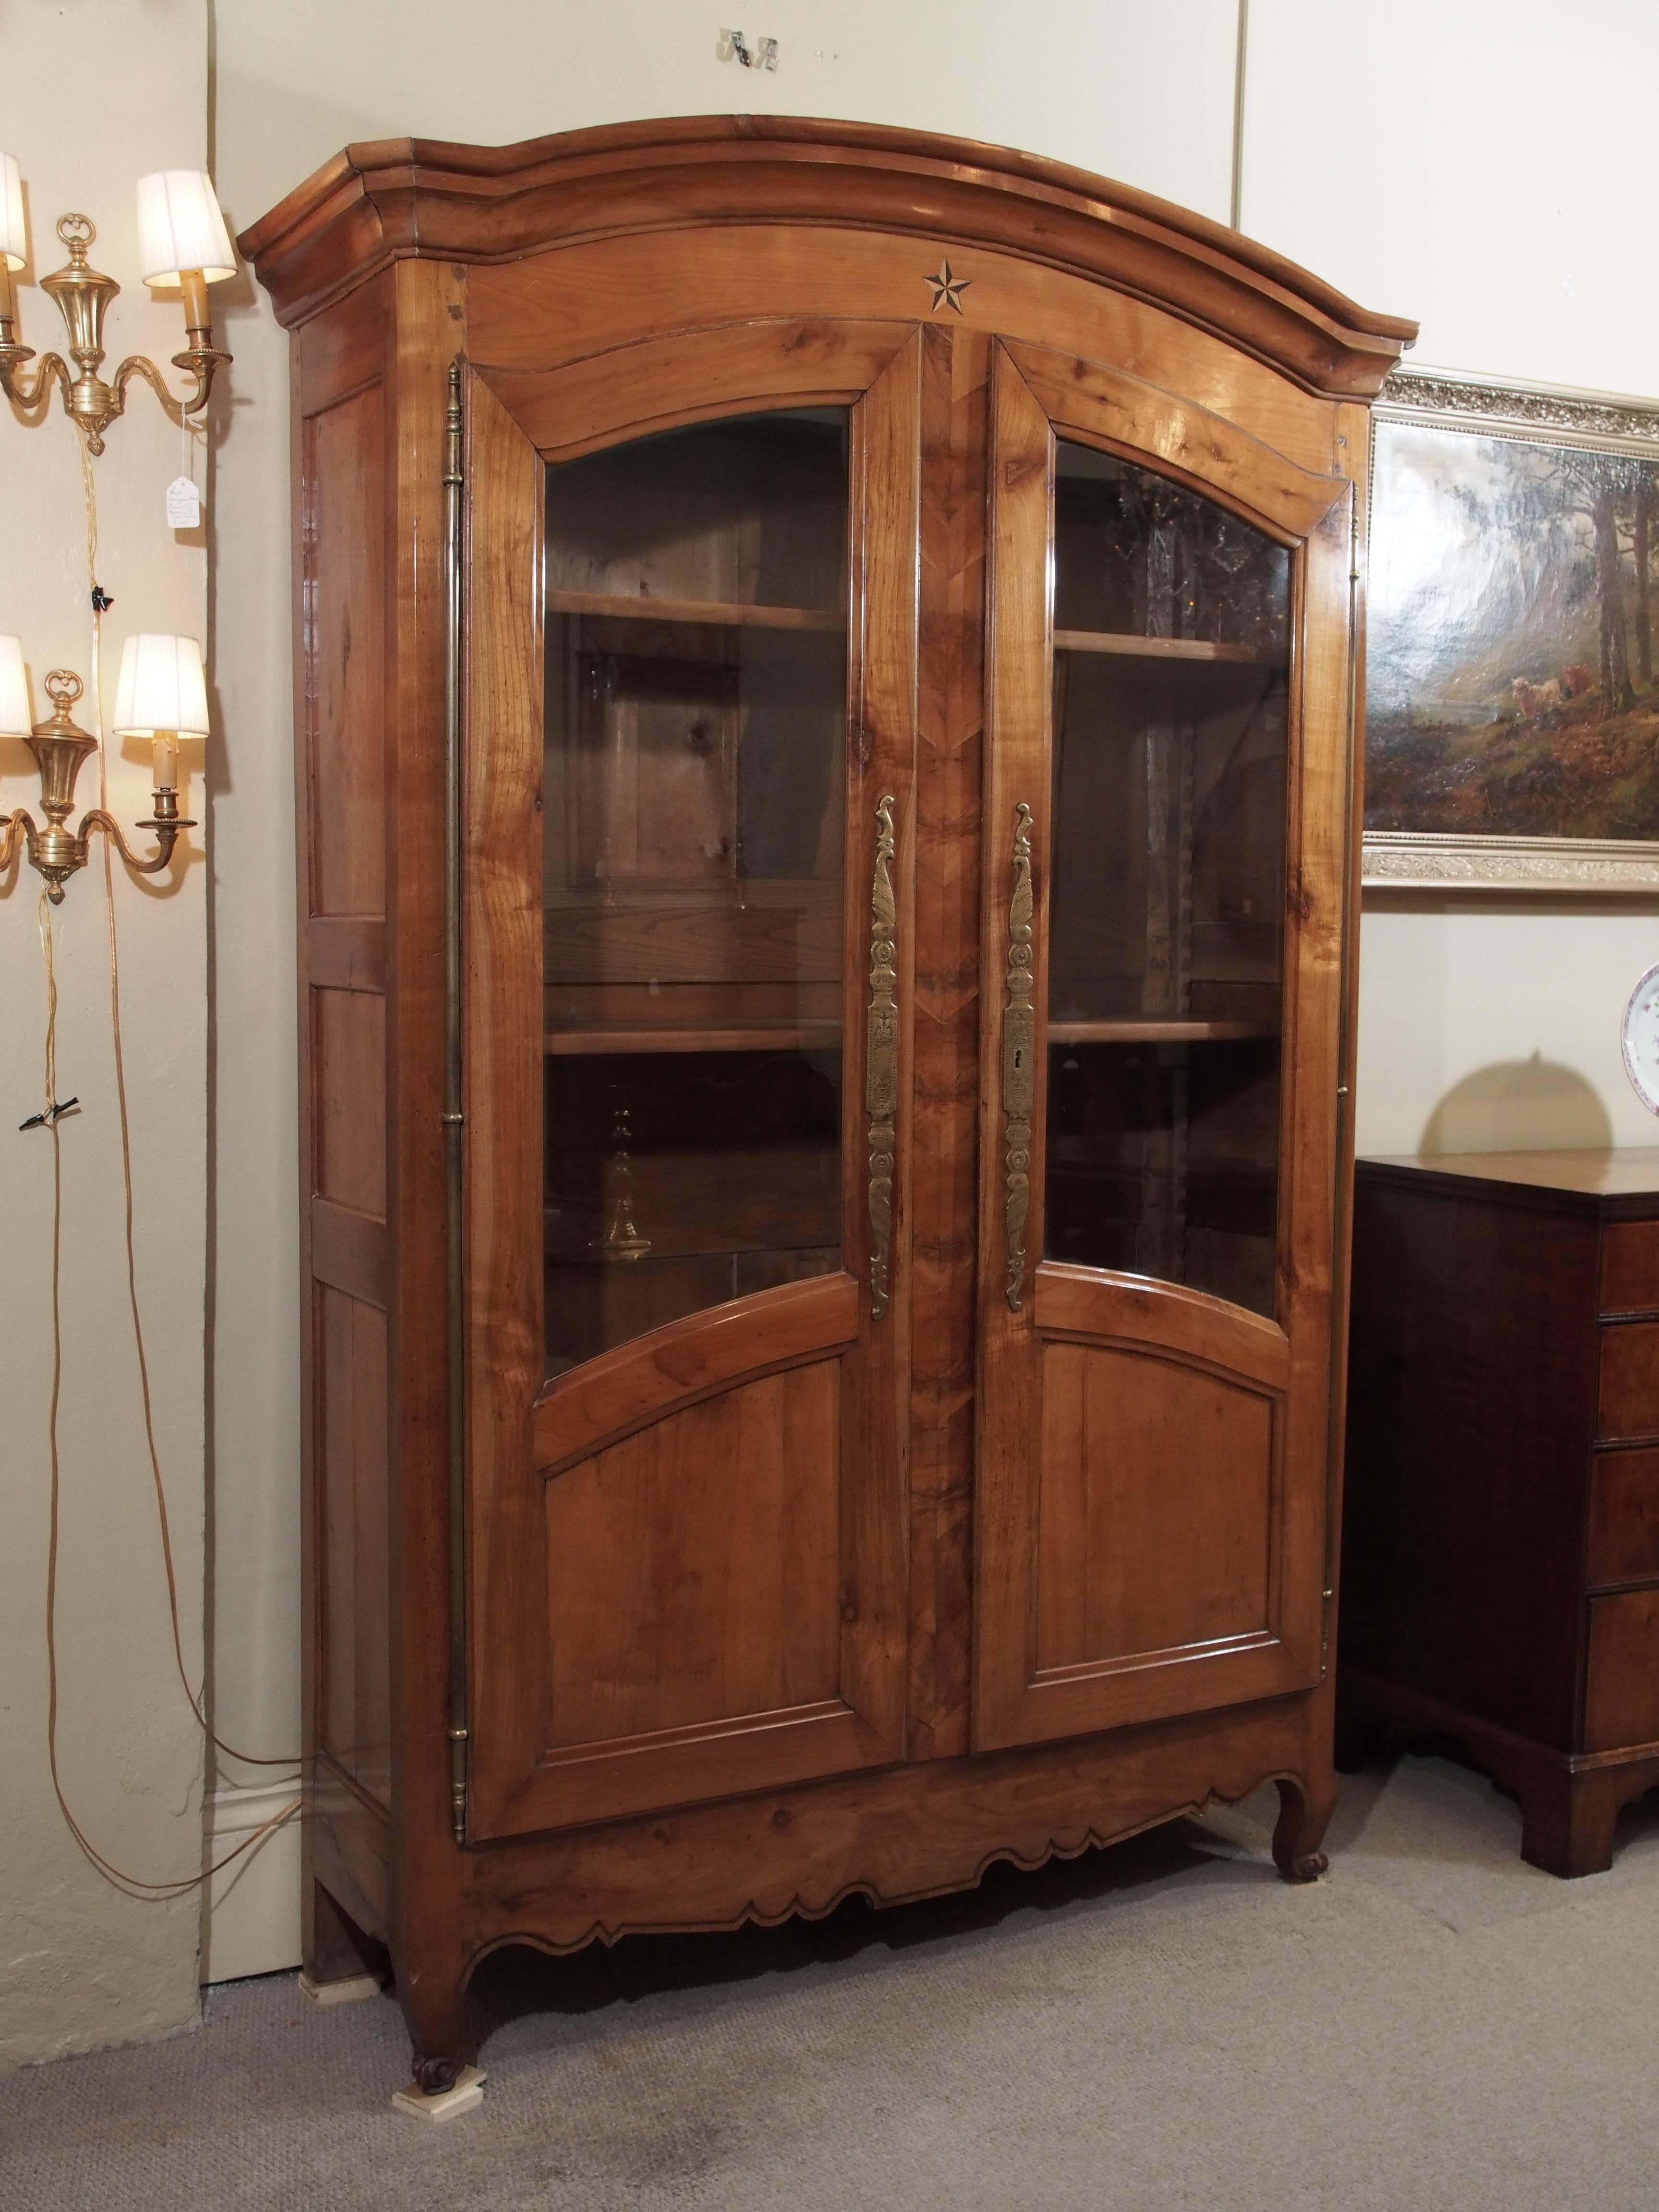 Antique French fruitwood inlaid bookcase/display cabinet.